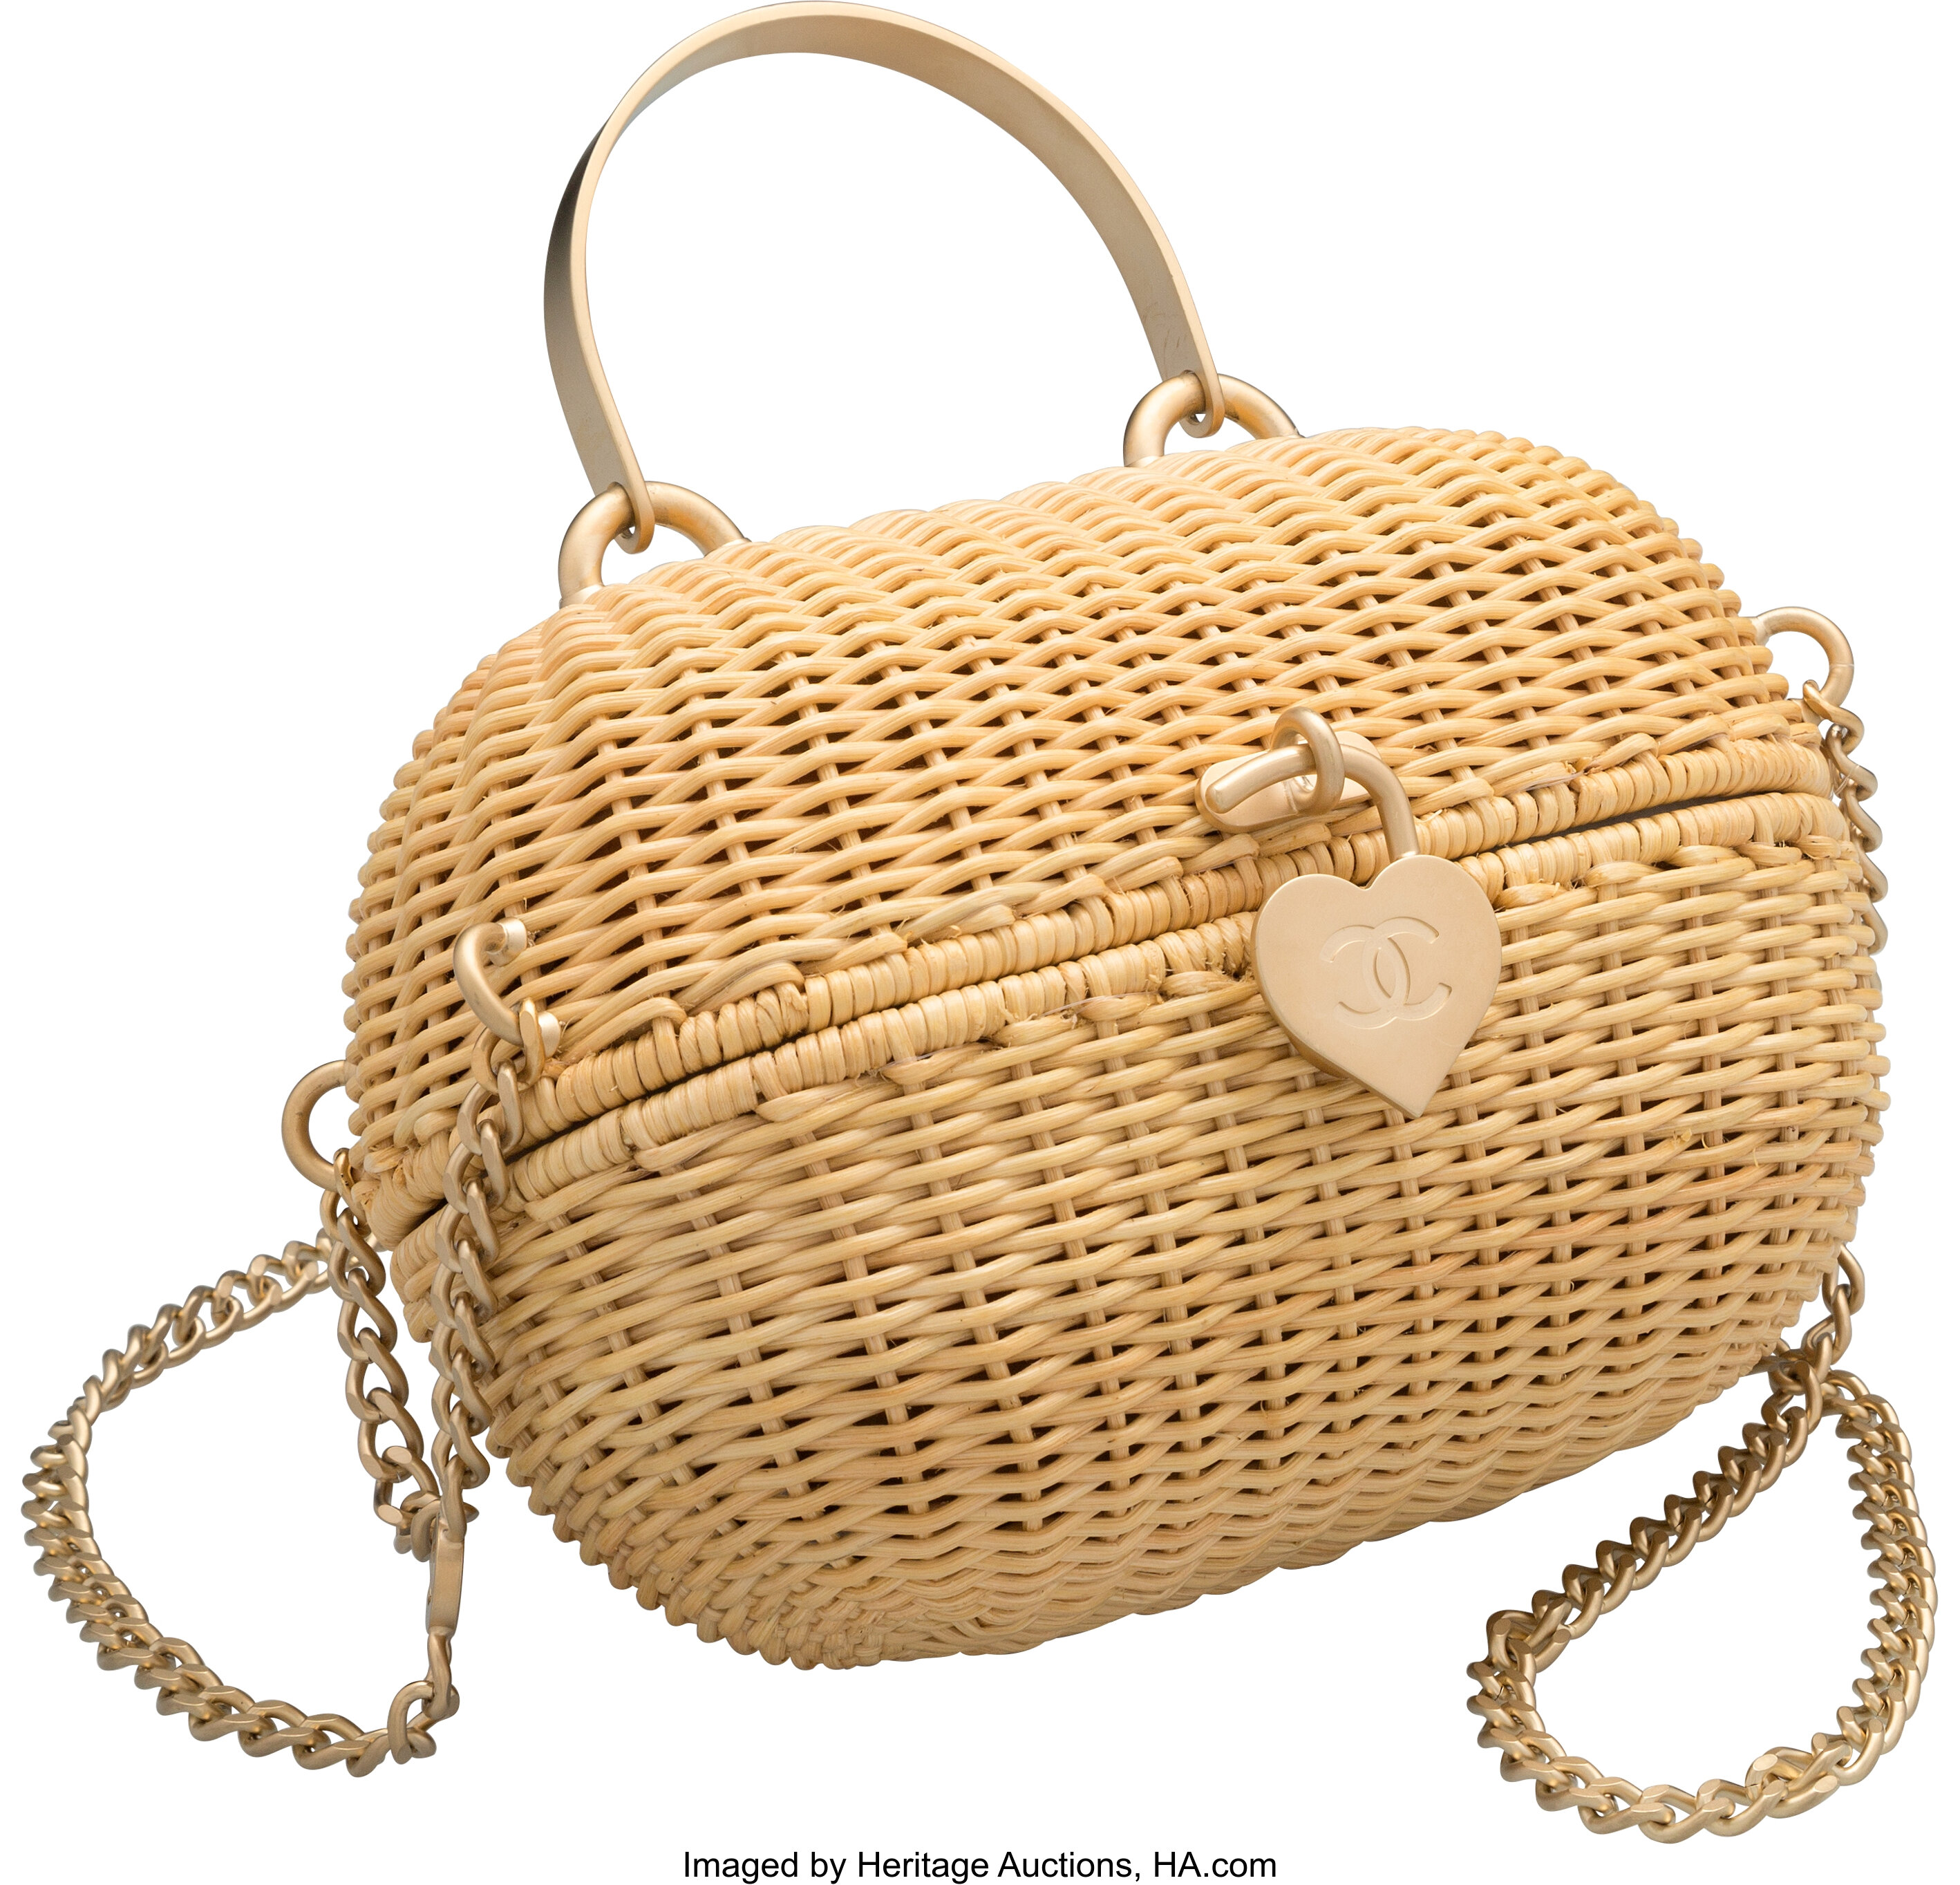 CHANEL, GLOSSY BLACK GABRIELLE HOBO BAG IN NATURAL RATTAN AND CALFSKIN  WITH GOLD HARDWARE, 2020, Handbags and Accessories, 2020